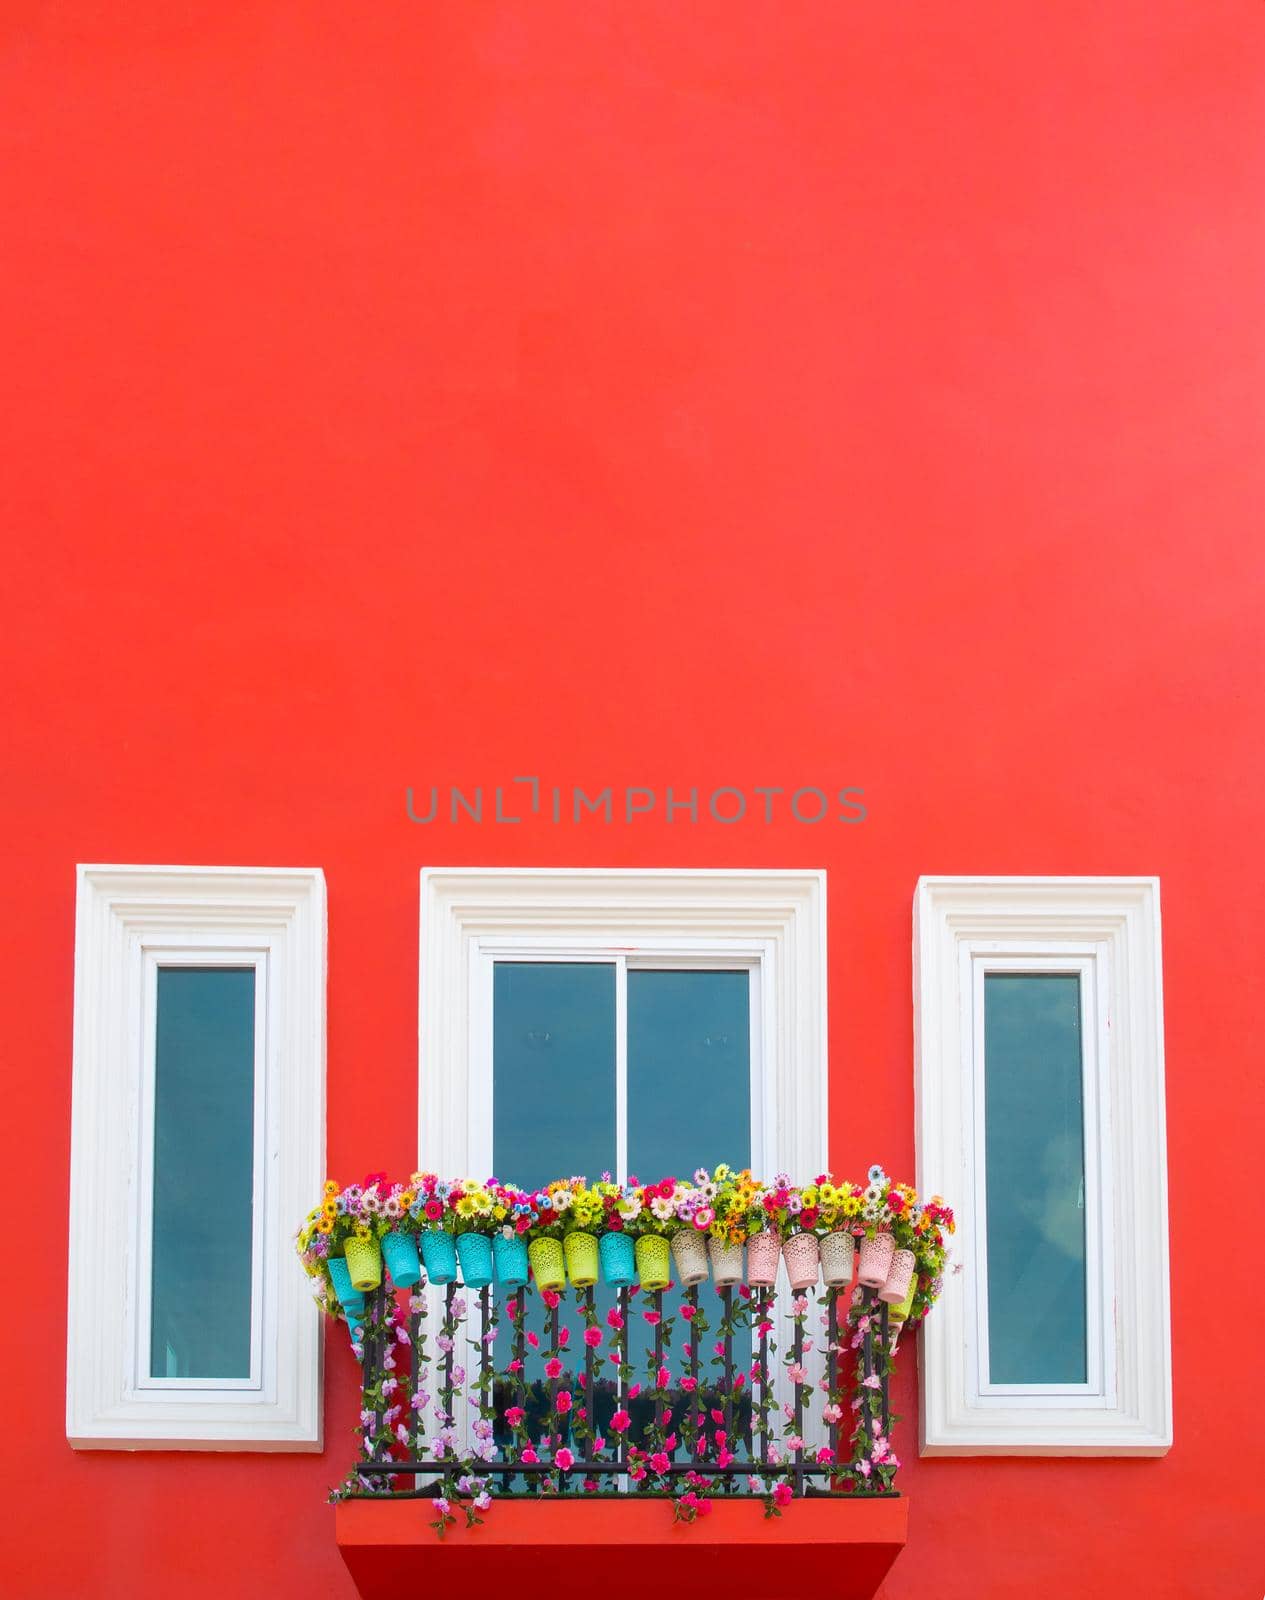 balcony and white windows on the red wall background by domonite